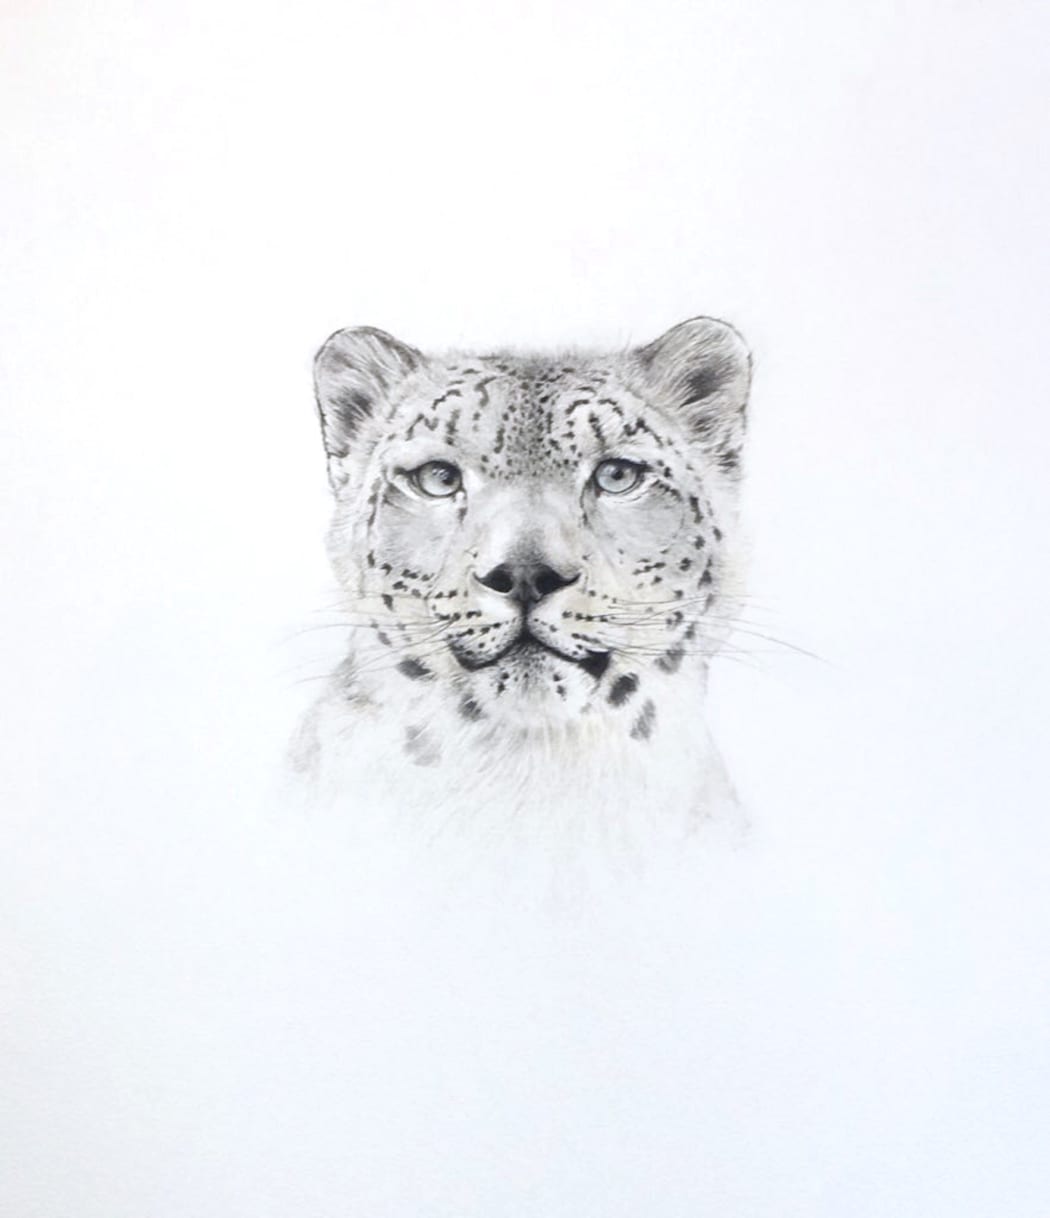 William Spring, Snow Leopard, watercolour on paper, 41 x 30 cms